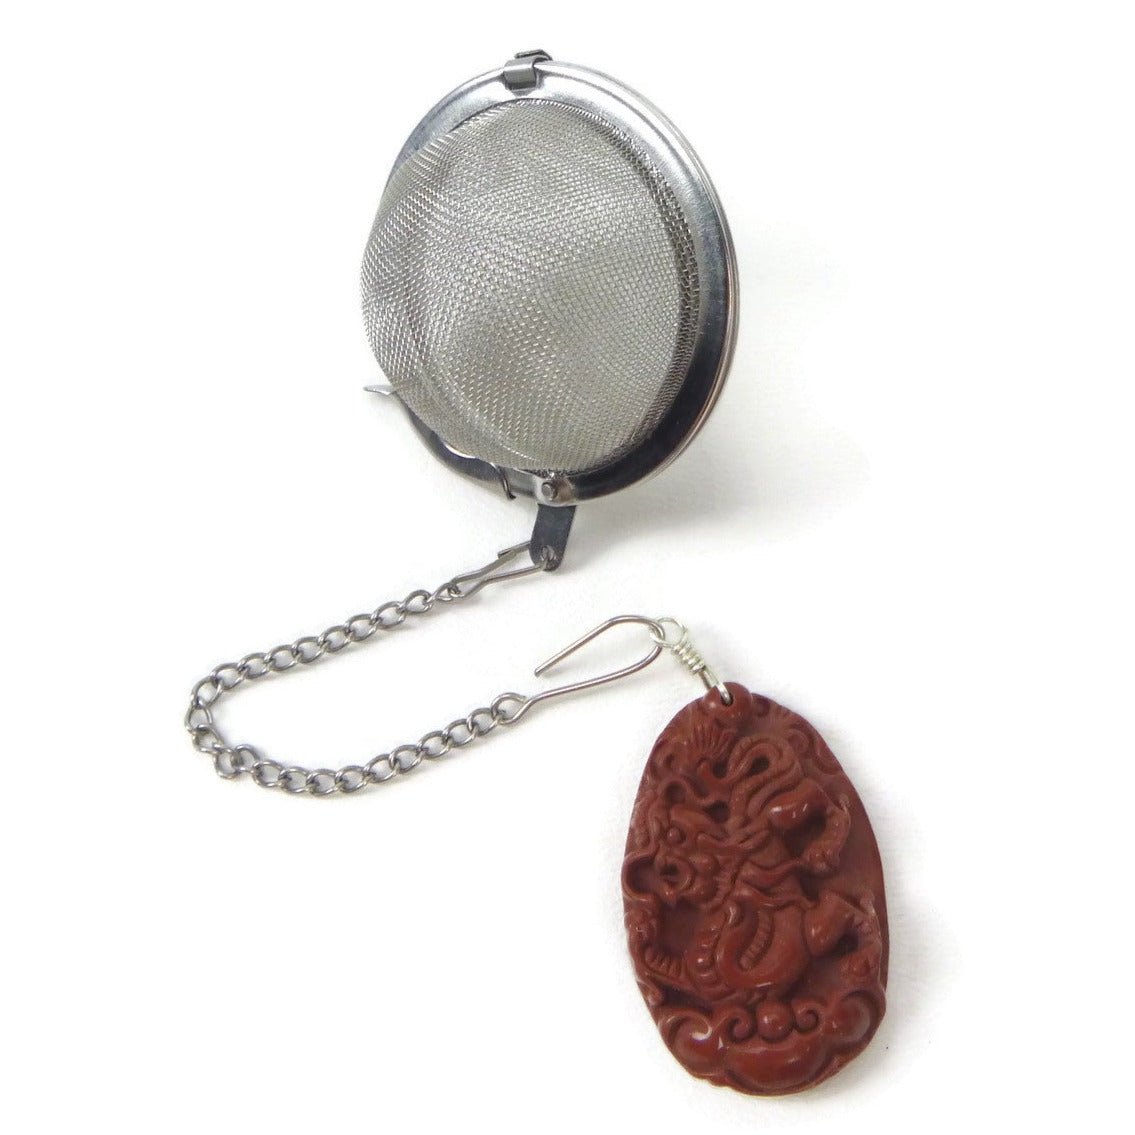 Tea Infuser with an Ebony Brown Carved Dragon Charm